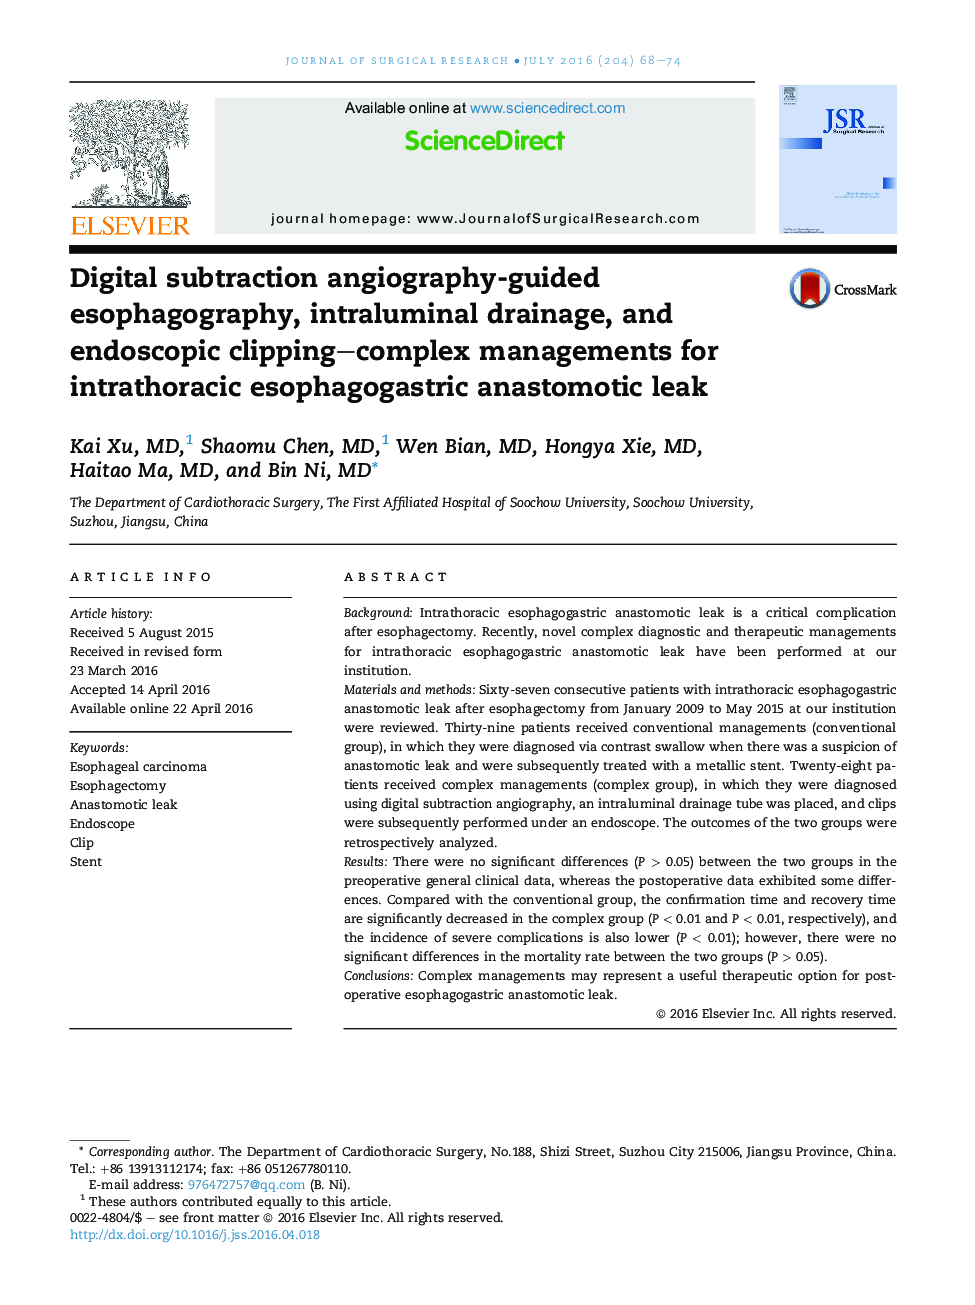 Digital subtraction angiography-guided esophagography, intraluminal drainage, and endoscopic clipping–complex managements for intrathoracic esophagogastric anastomotic leak